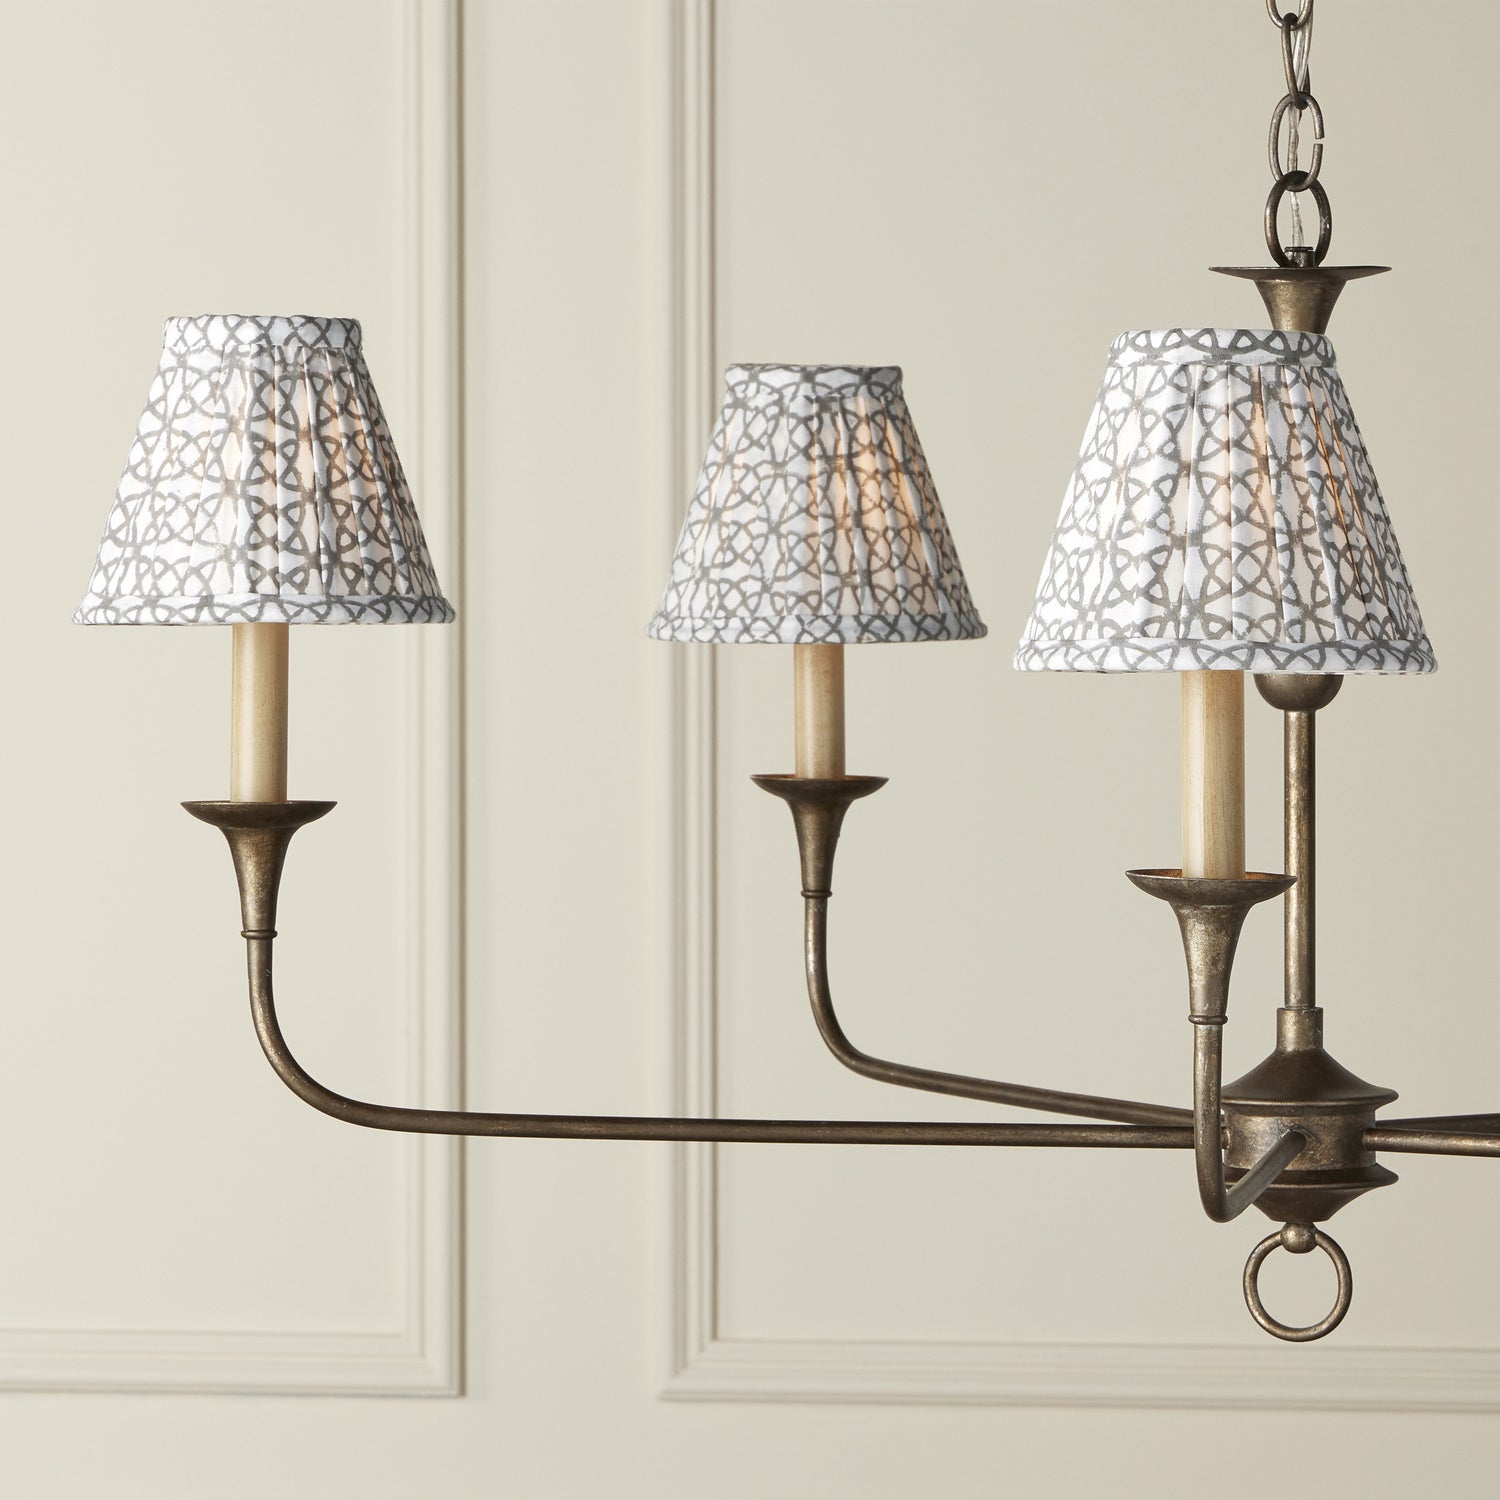 Chandelier Shade in Natural/Gray finish